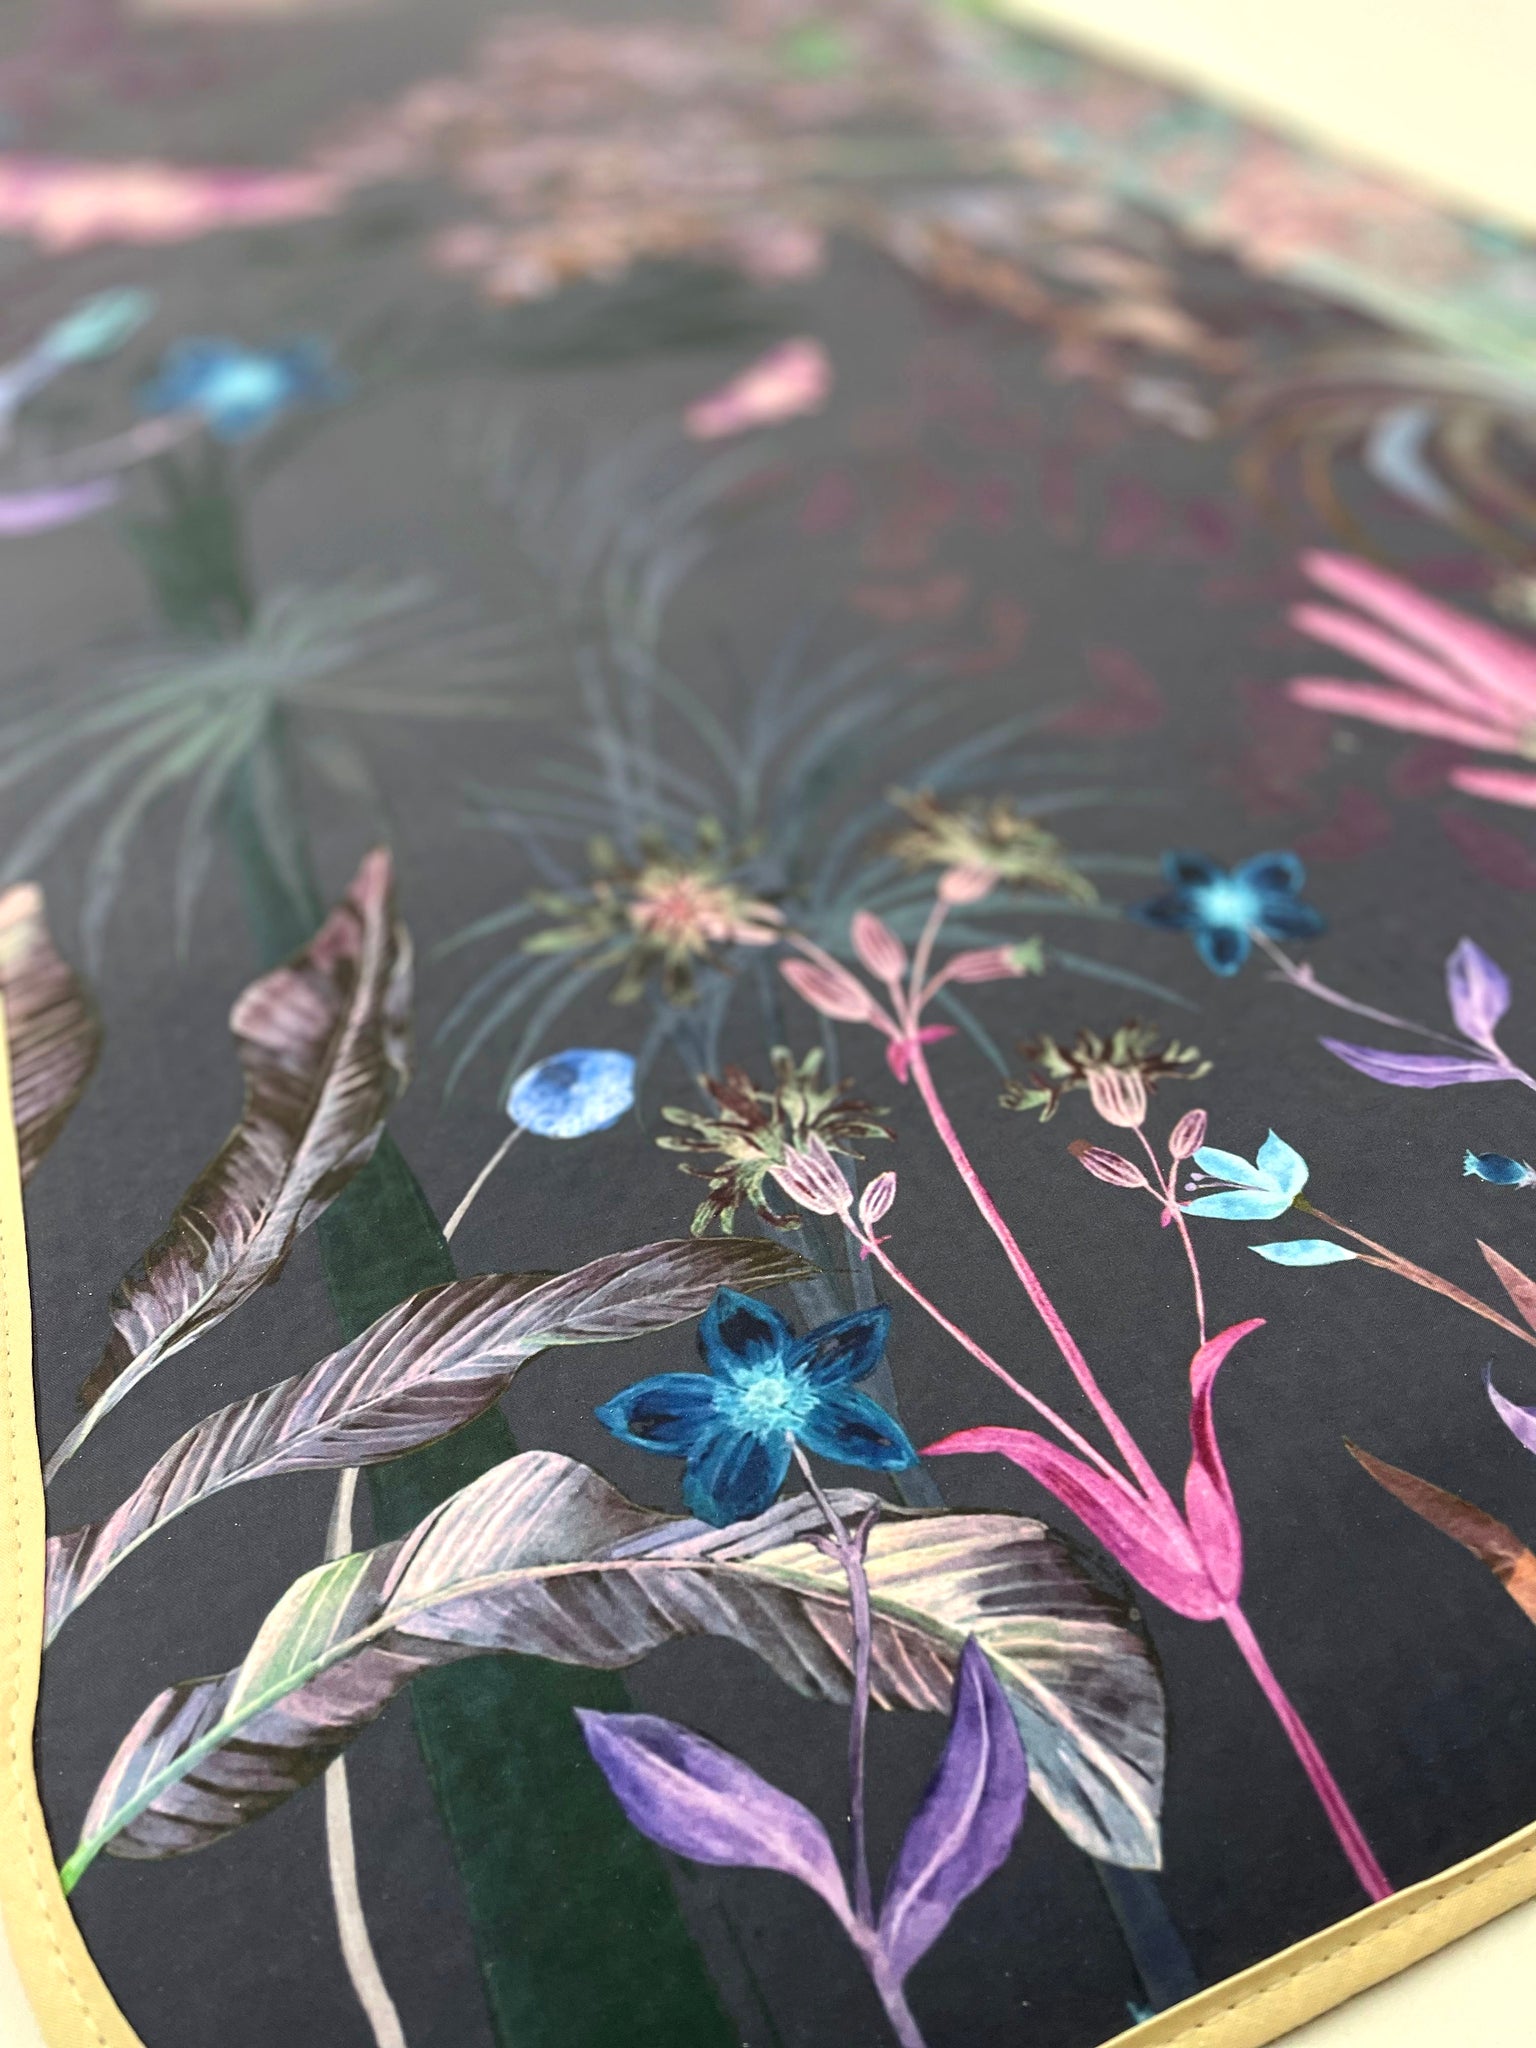 The 'Enchanted forest' print yoga mat for pilates, yoga and relaxation –  Alice Acreman Silks